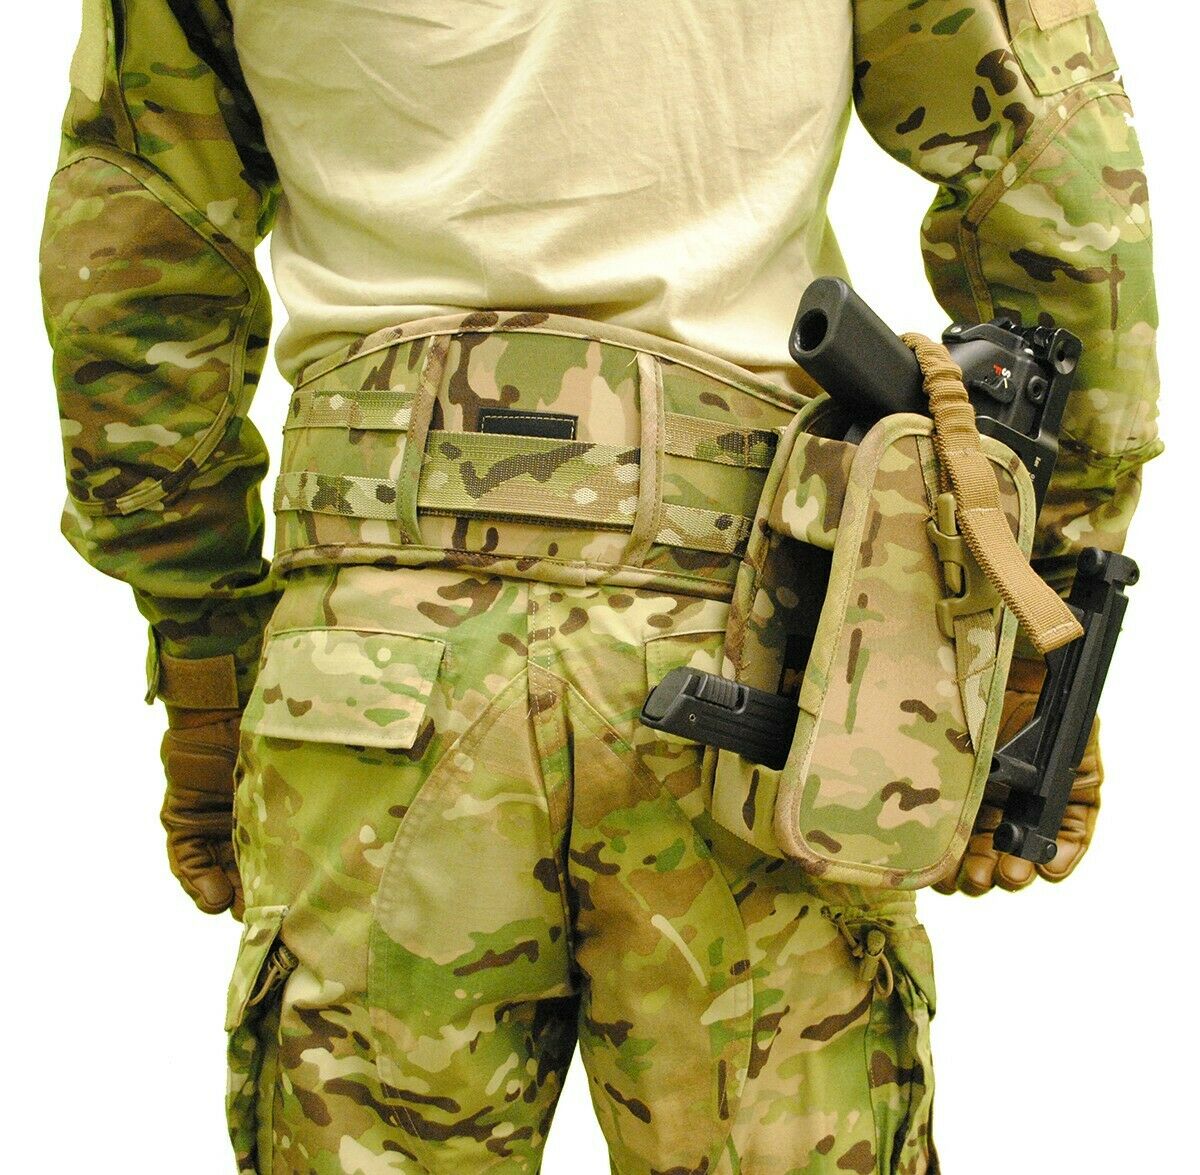 MMI Outdoor M320 Grenade Launcher Holster System. 